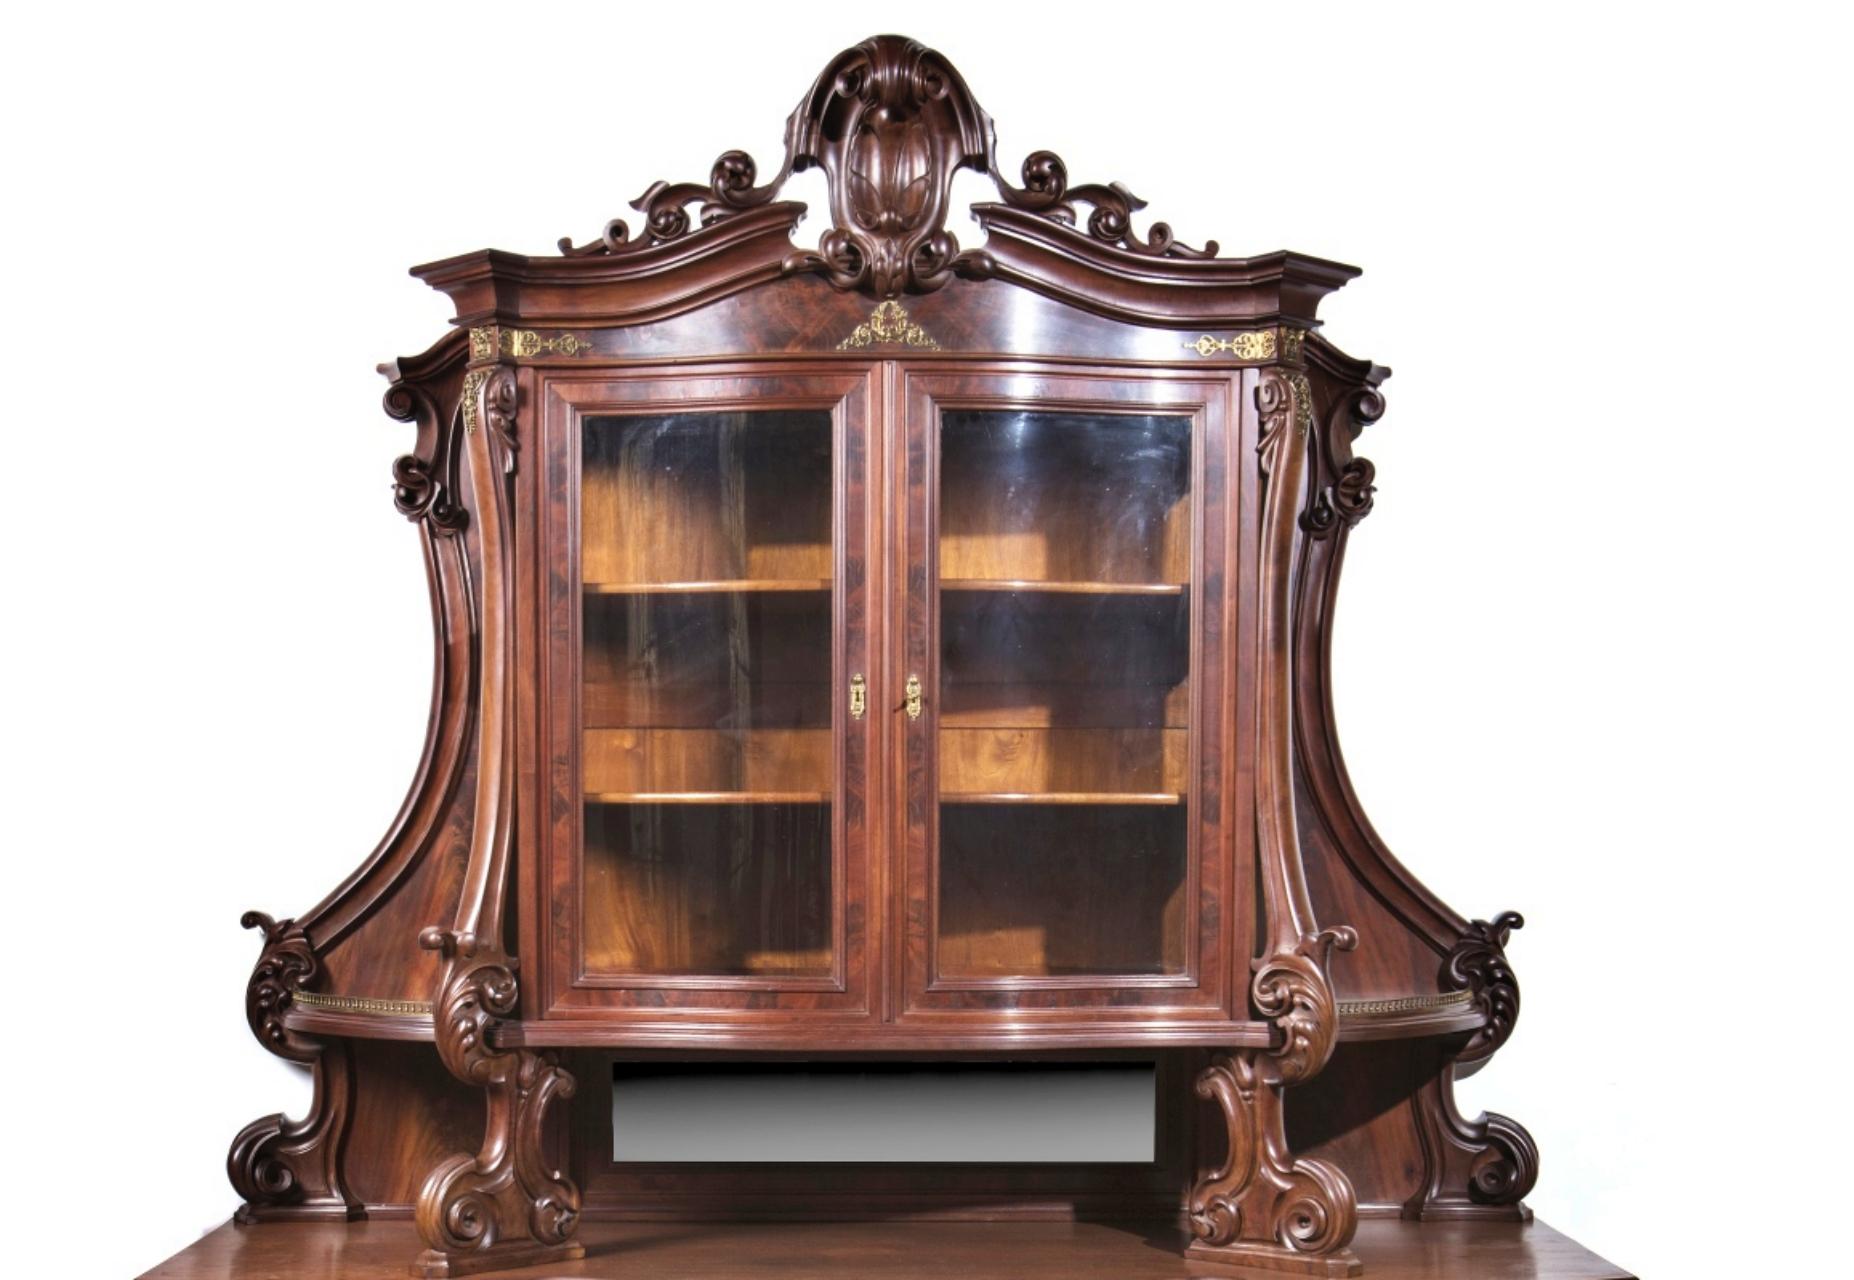 English Furniture Victorian cupboard
in mahogany wood.
Lower body with a drawer, and two doors.
Upper body with mirror, two glass doors, interior with two shelves.
Bronze applications 